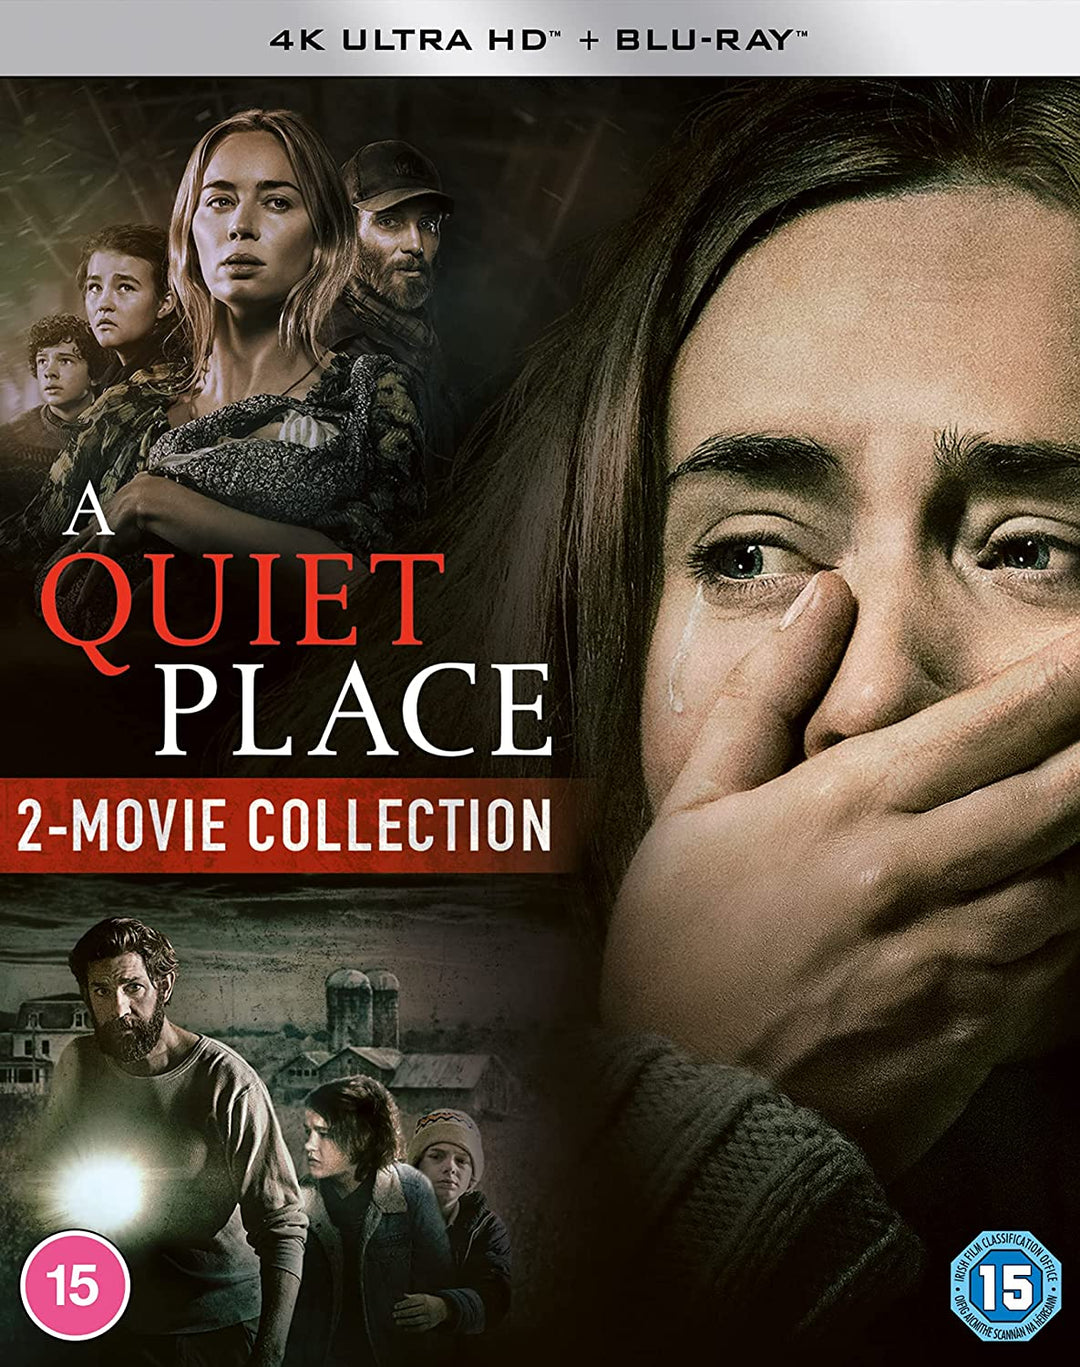 A Quiet Place Part I and Part II: 2-movie collection 4K UHD - Horror/Sci-fi [Blu-ray]